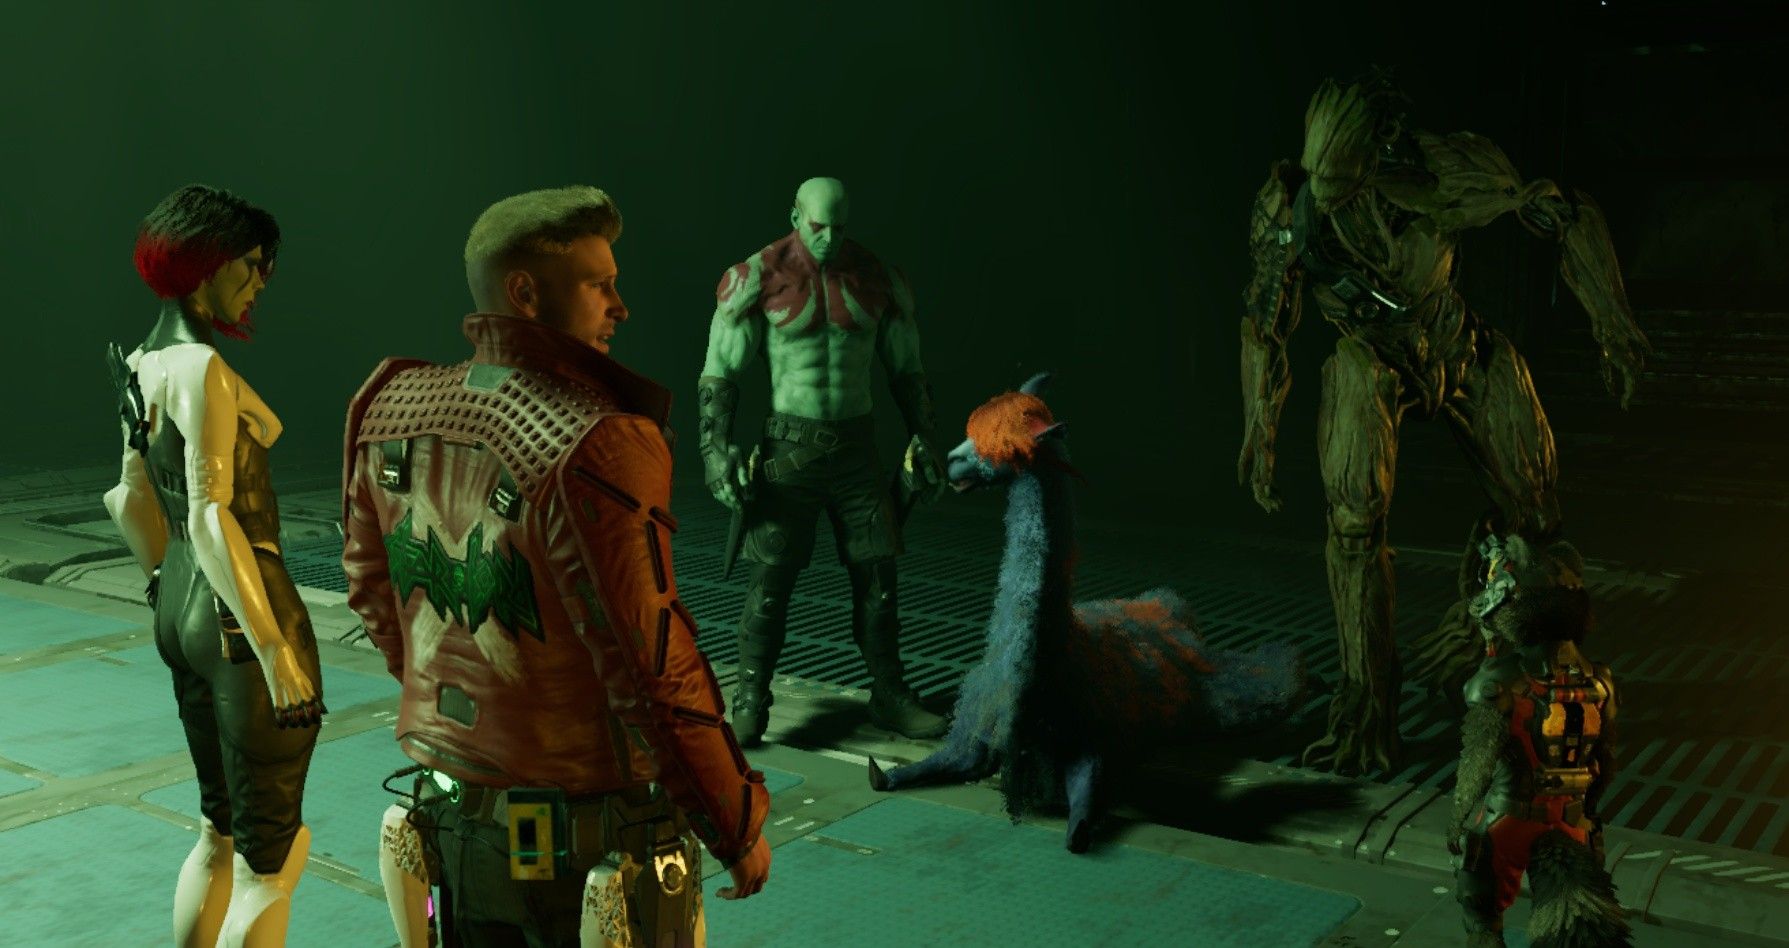 The team gathers around a space llama in the Quarantine Zone during the first mission in Marvel's Guardians of the Galaxy